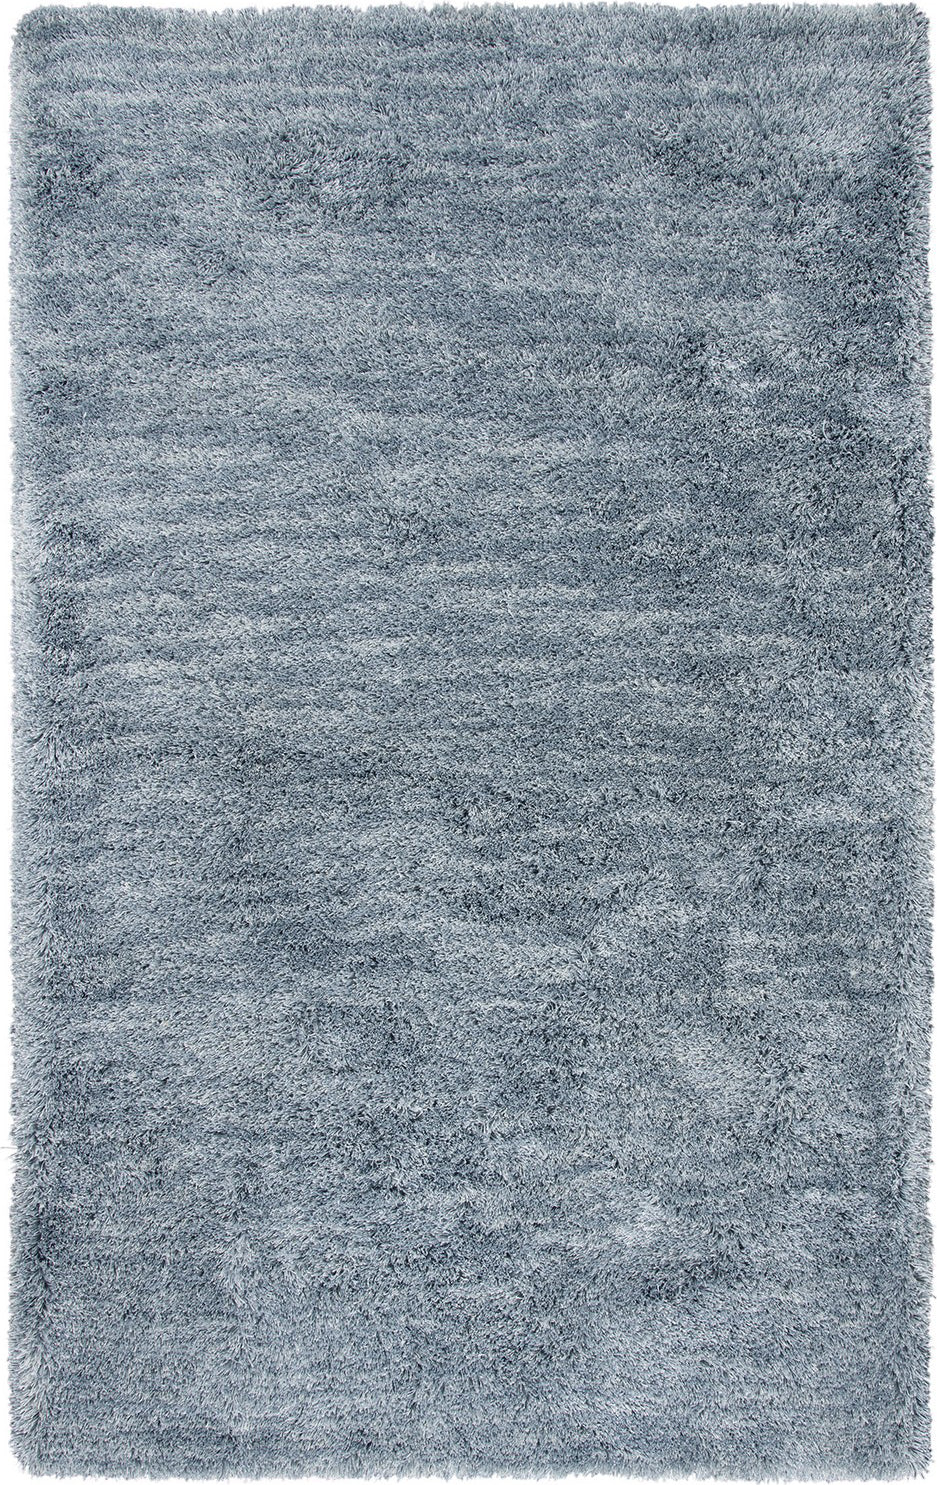 Rizzy Whistler WIS102 Blue Area Rug main image